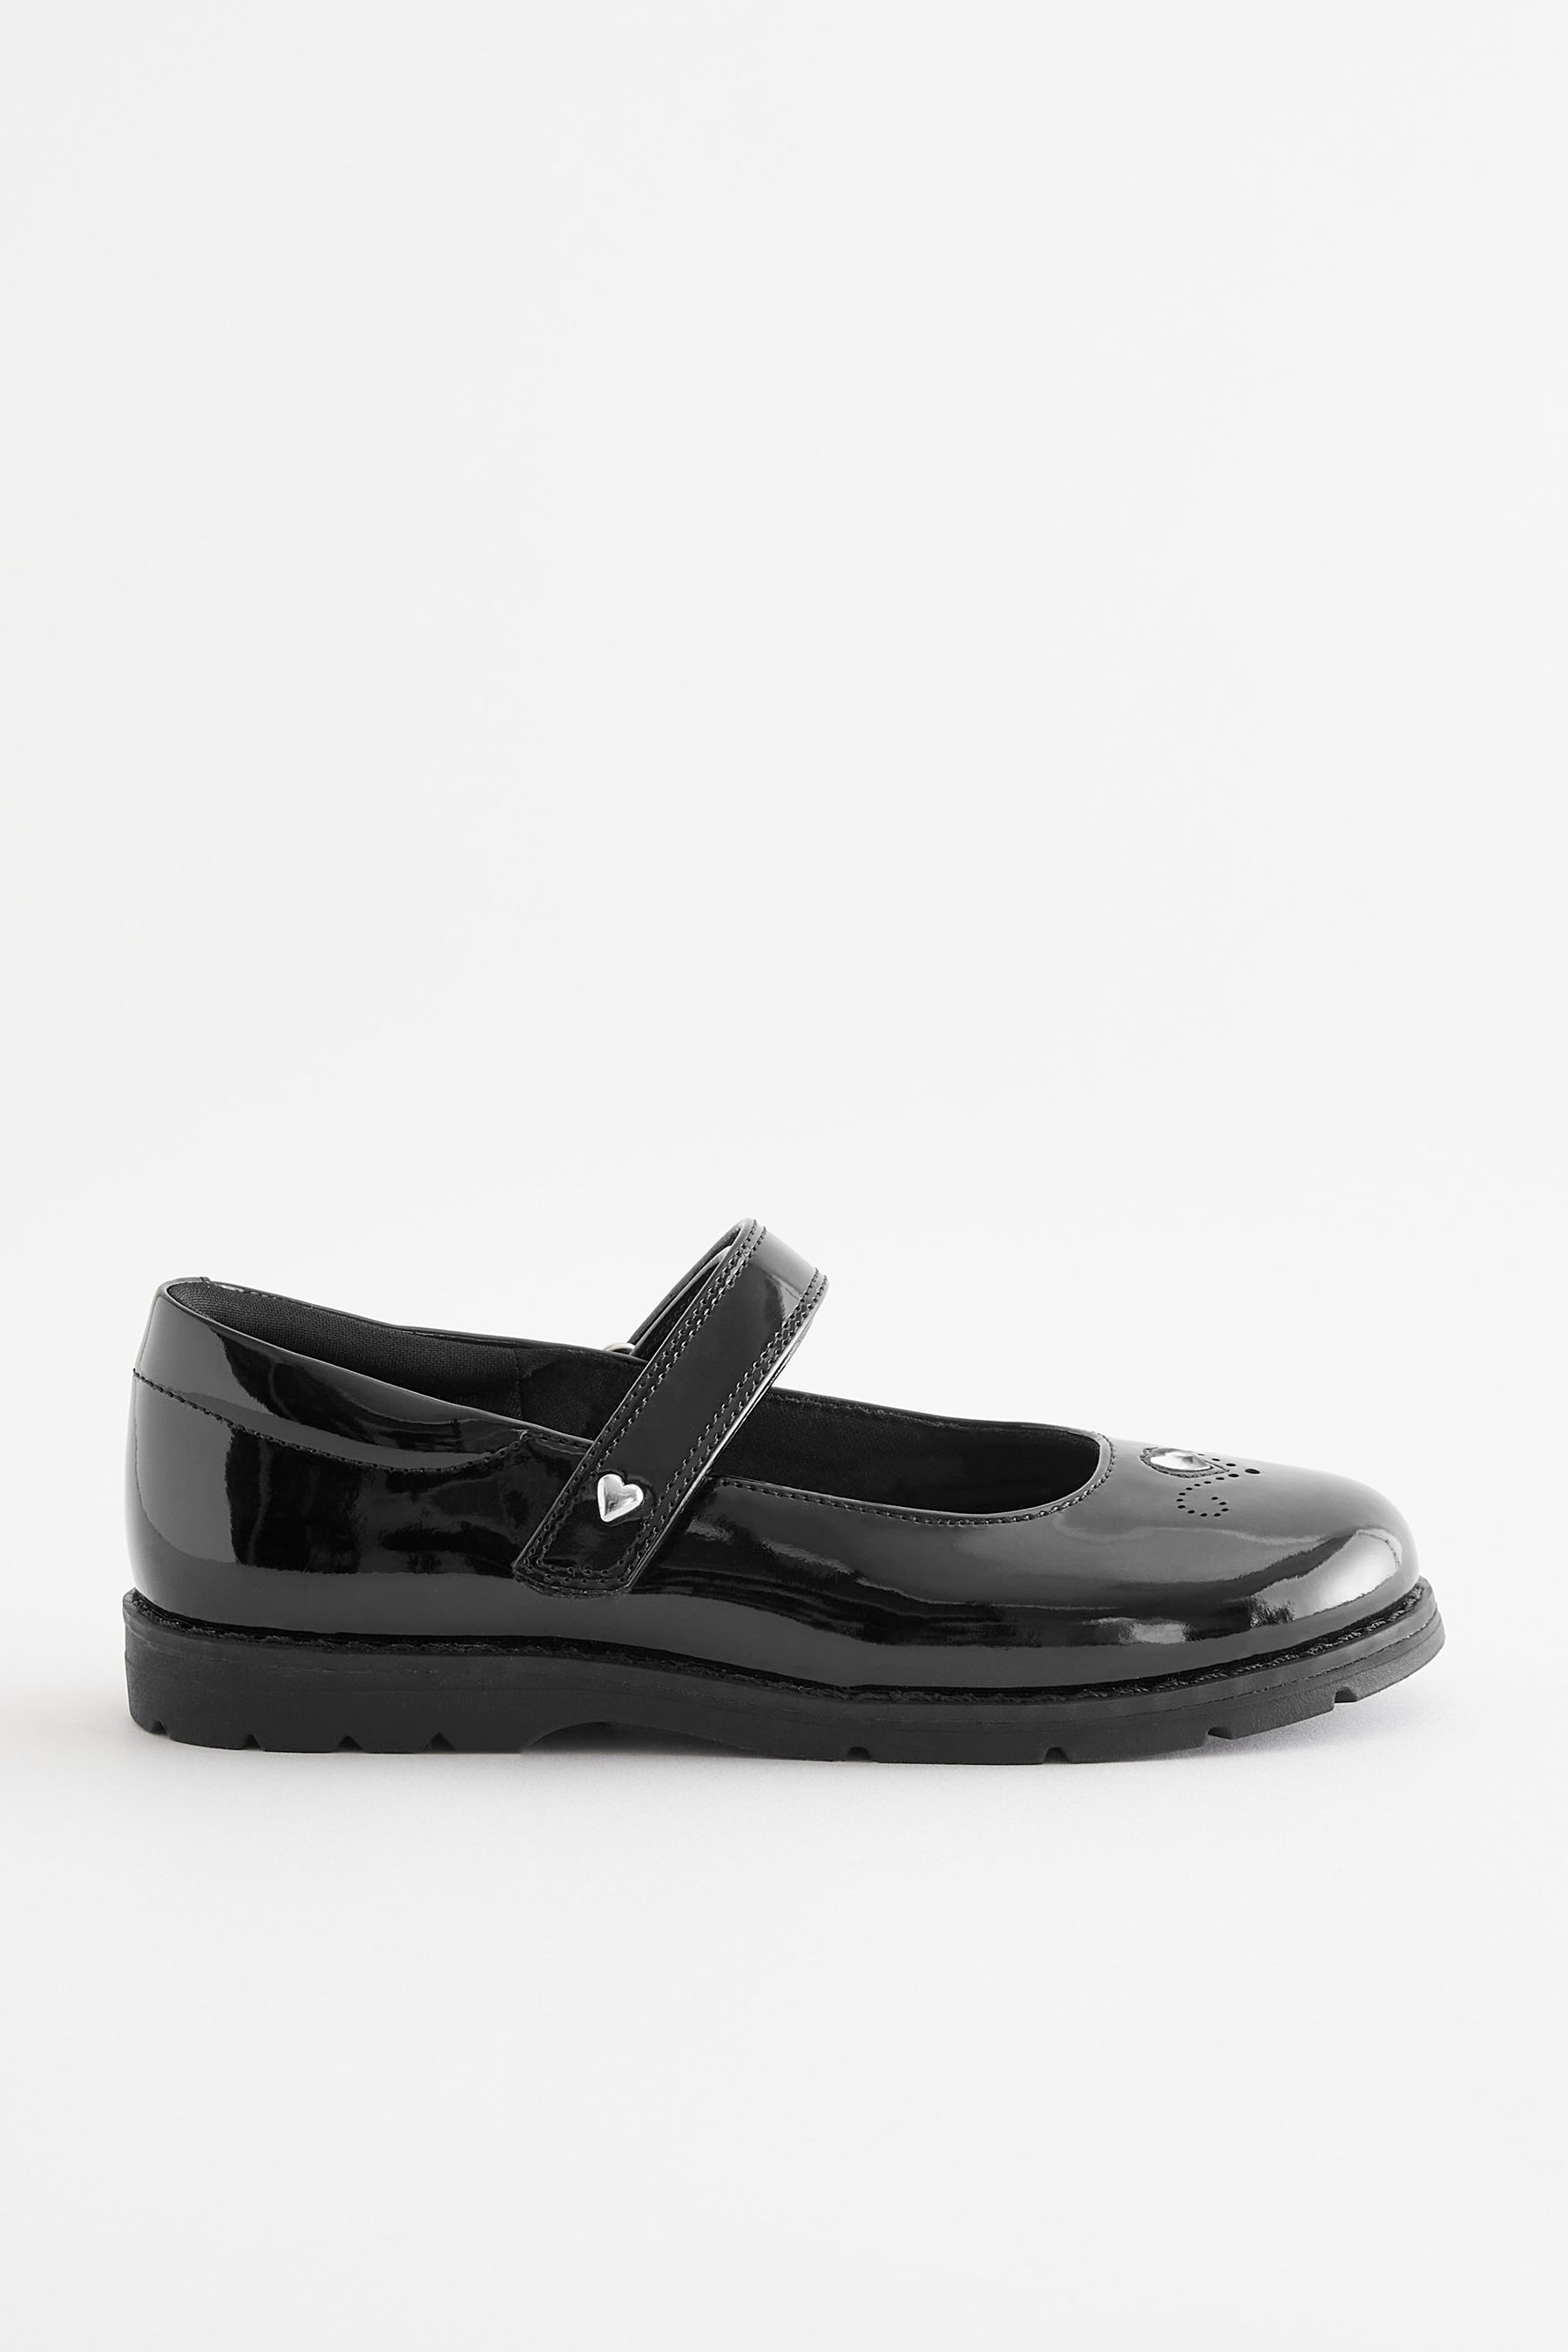 Buy Black School Gem Mary Jane Shoes from the Next UK online shop